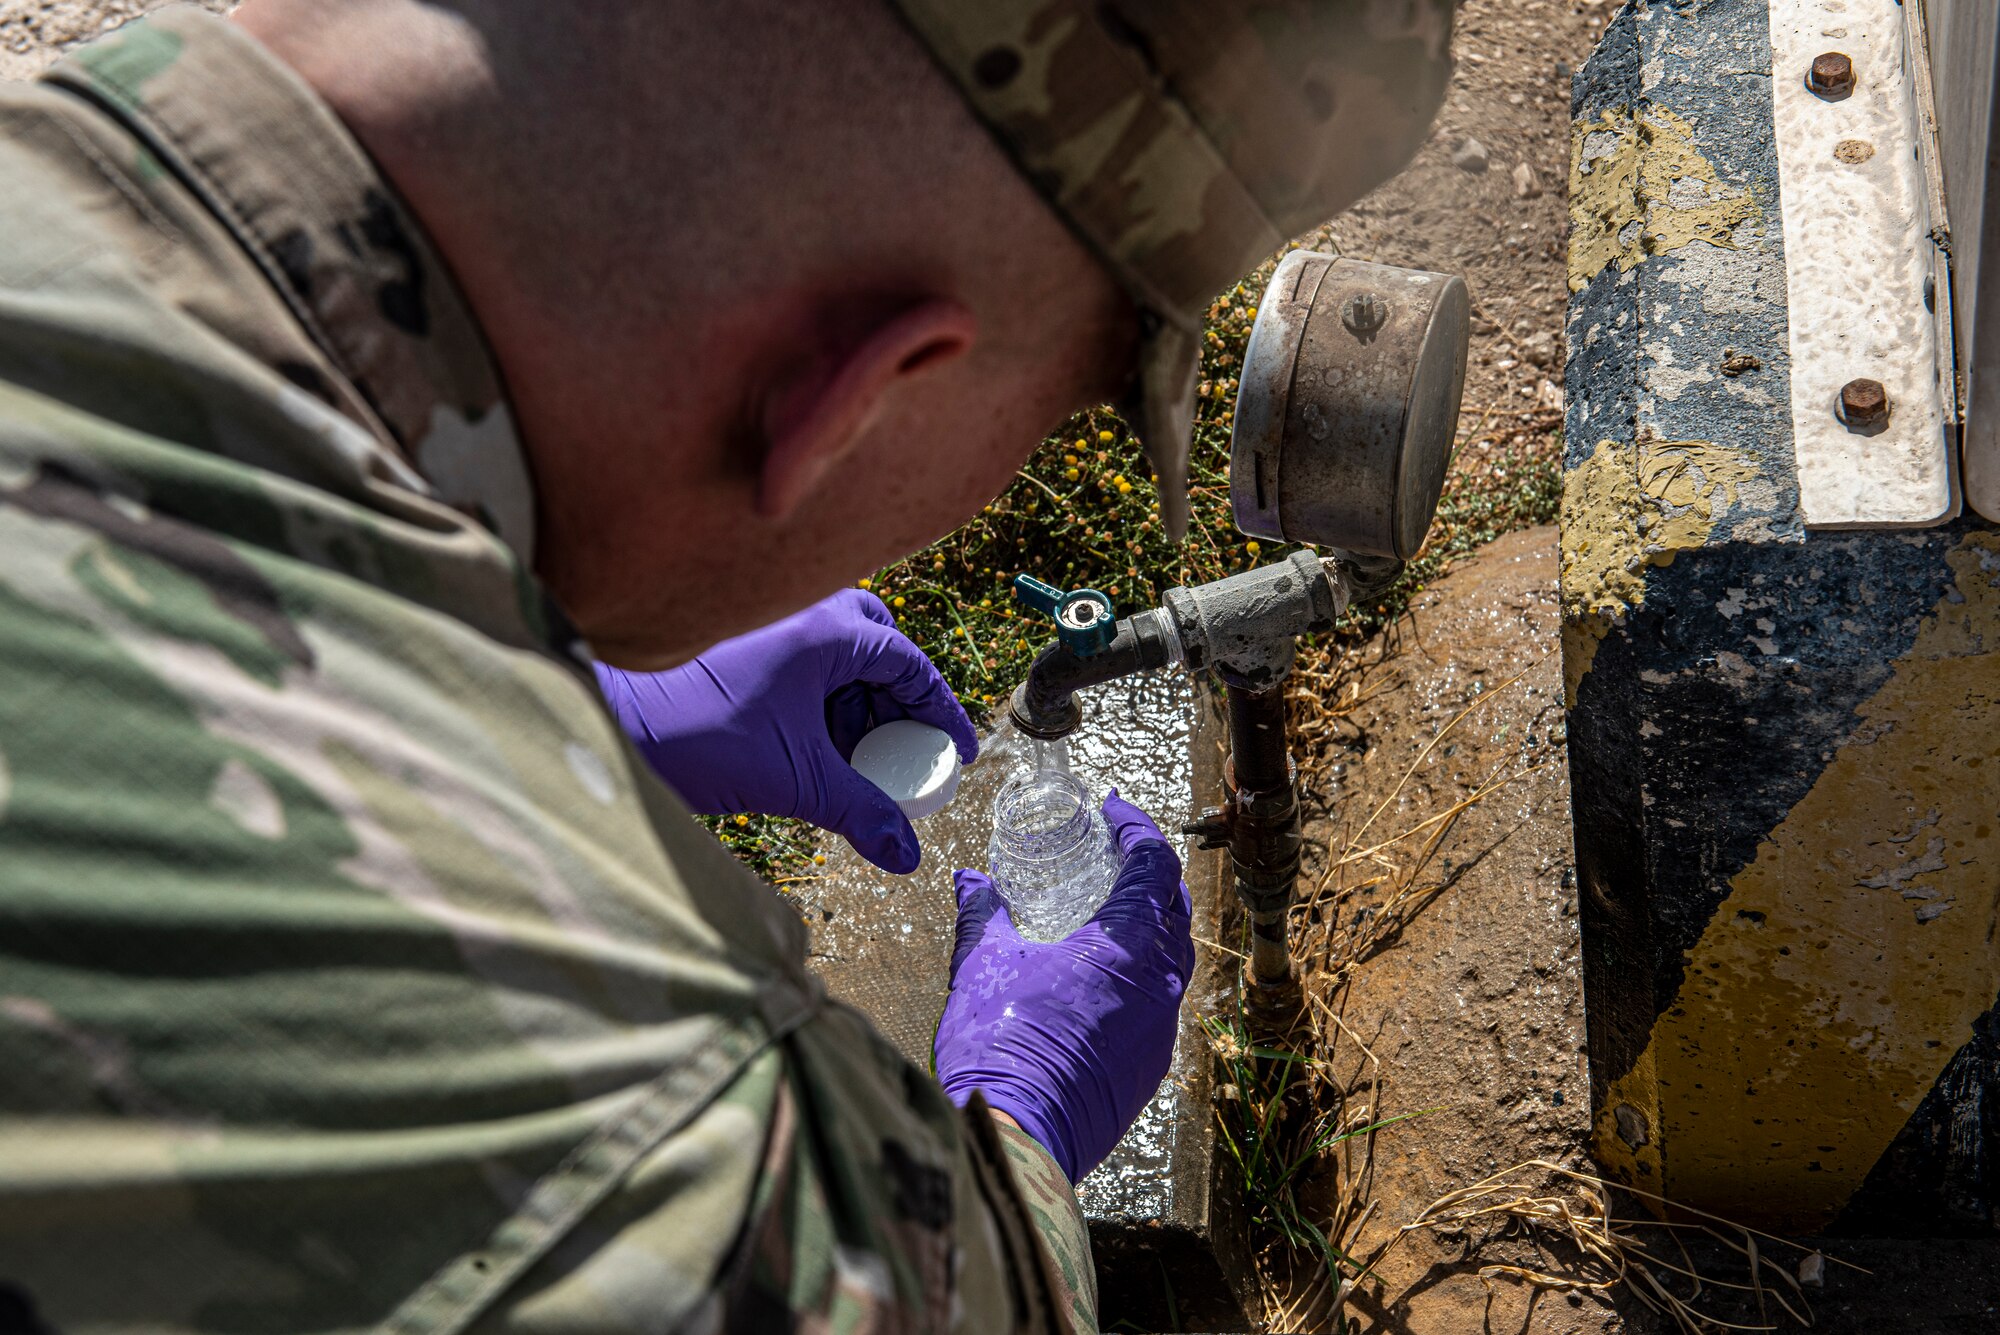 Senior Airman Matthew Ketterling, 379th Expeditionary Medical Operations Squadron bioenvironmental engineering journeyman, collects water samples to test for bacteria and chemicals June 16, 2021, at Al Udeid Air Base, Qatar.